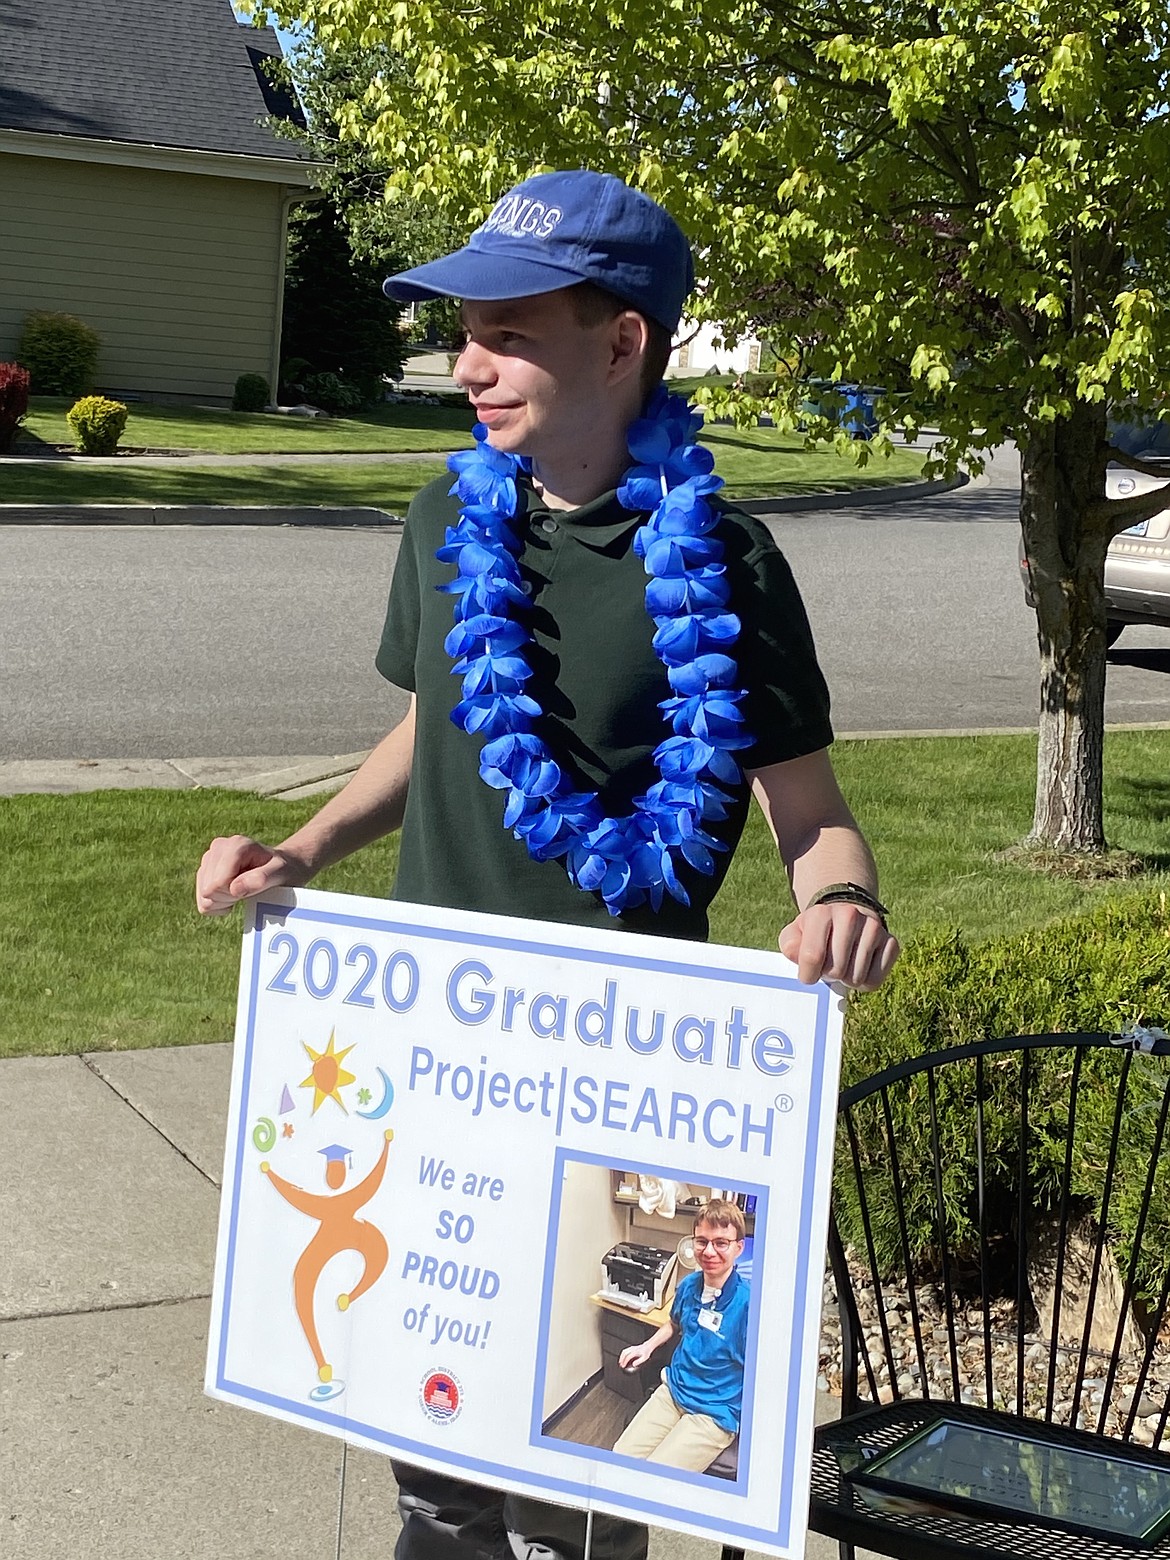 In a celebration lei, Project SEARCH graduate James Sane holds a sign sharing his accomplishments after completing the program during a surprise drive-by graduation celebration Wednesday evening.